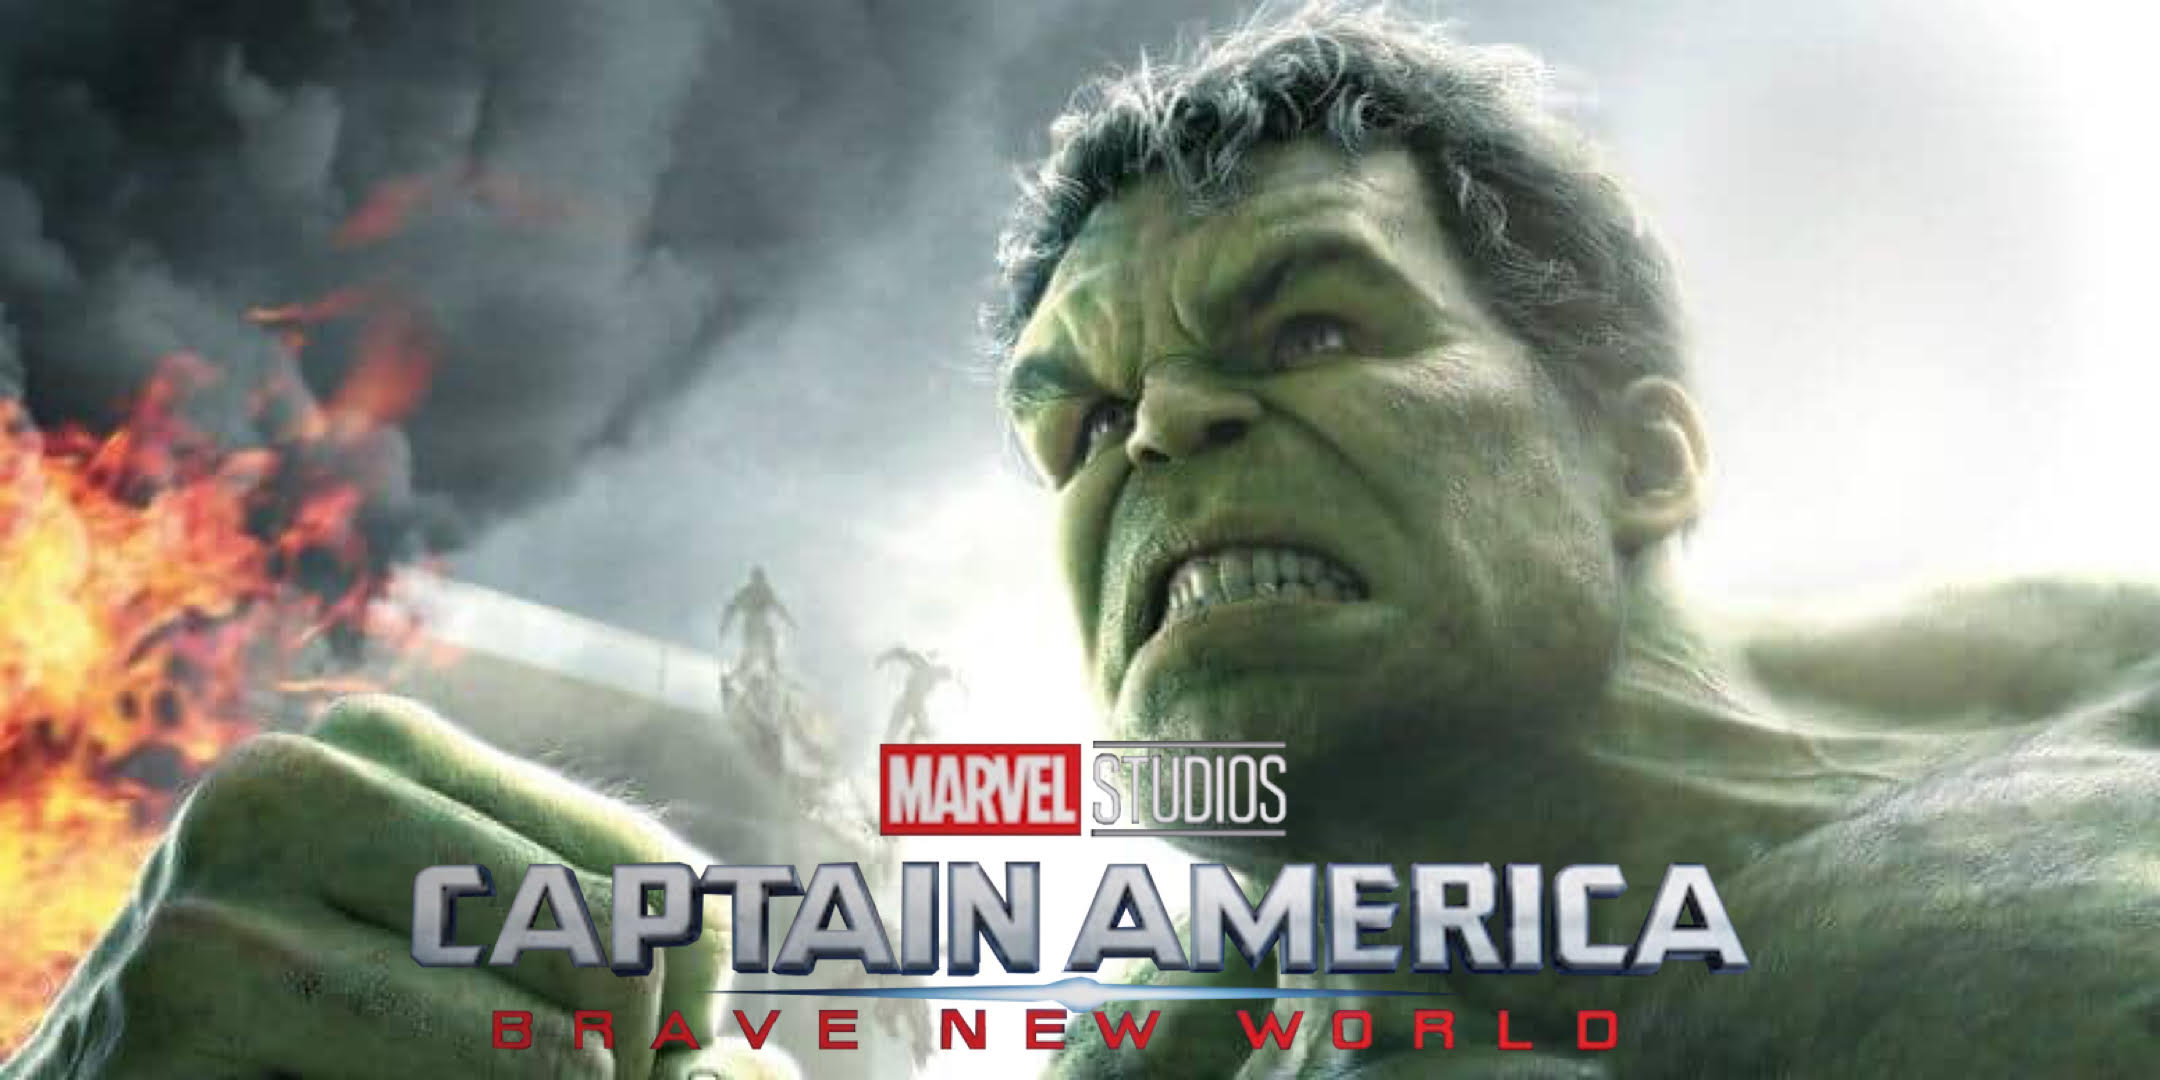 Mark Ruffalo Confirms He Is Back As Bruce Banner/The Hulk In ‘Captain America: Brave New World’